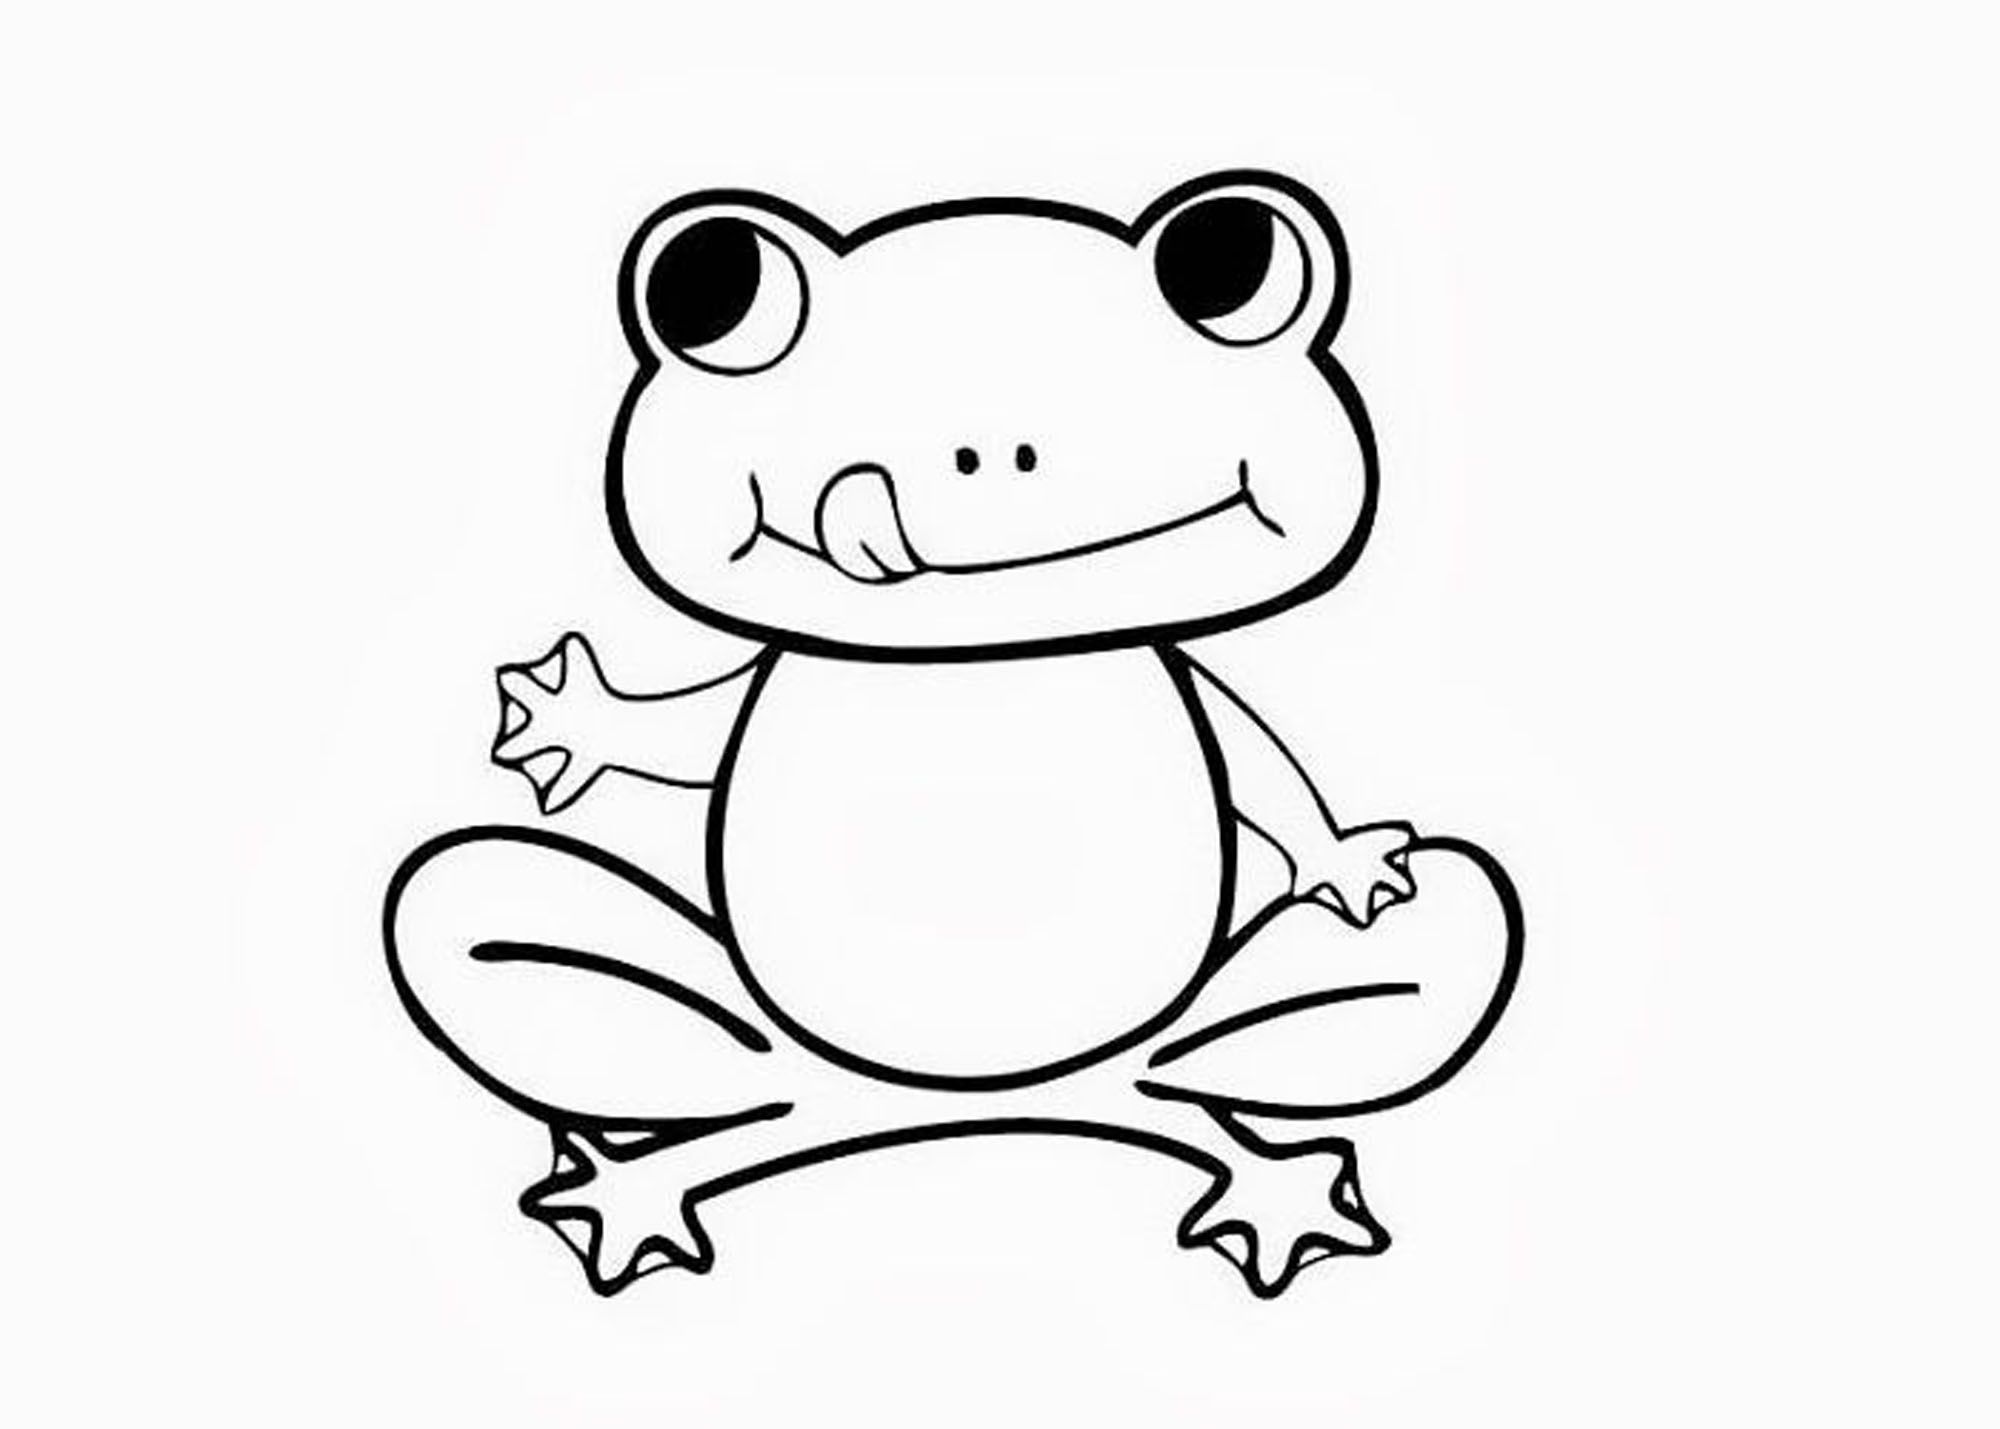 466 Animal Cute Frog Coloring Pages for Adult